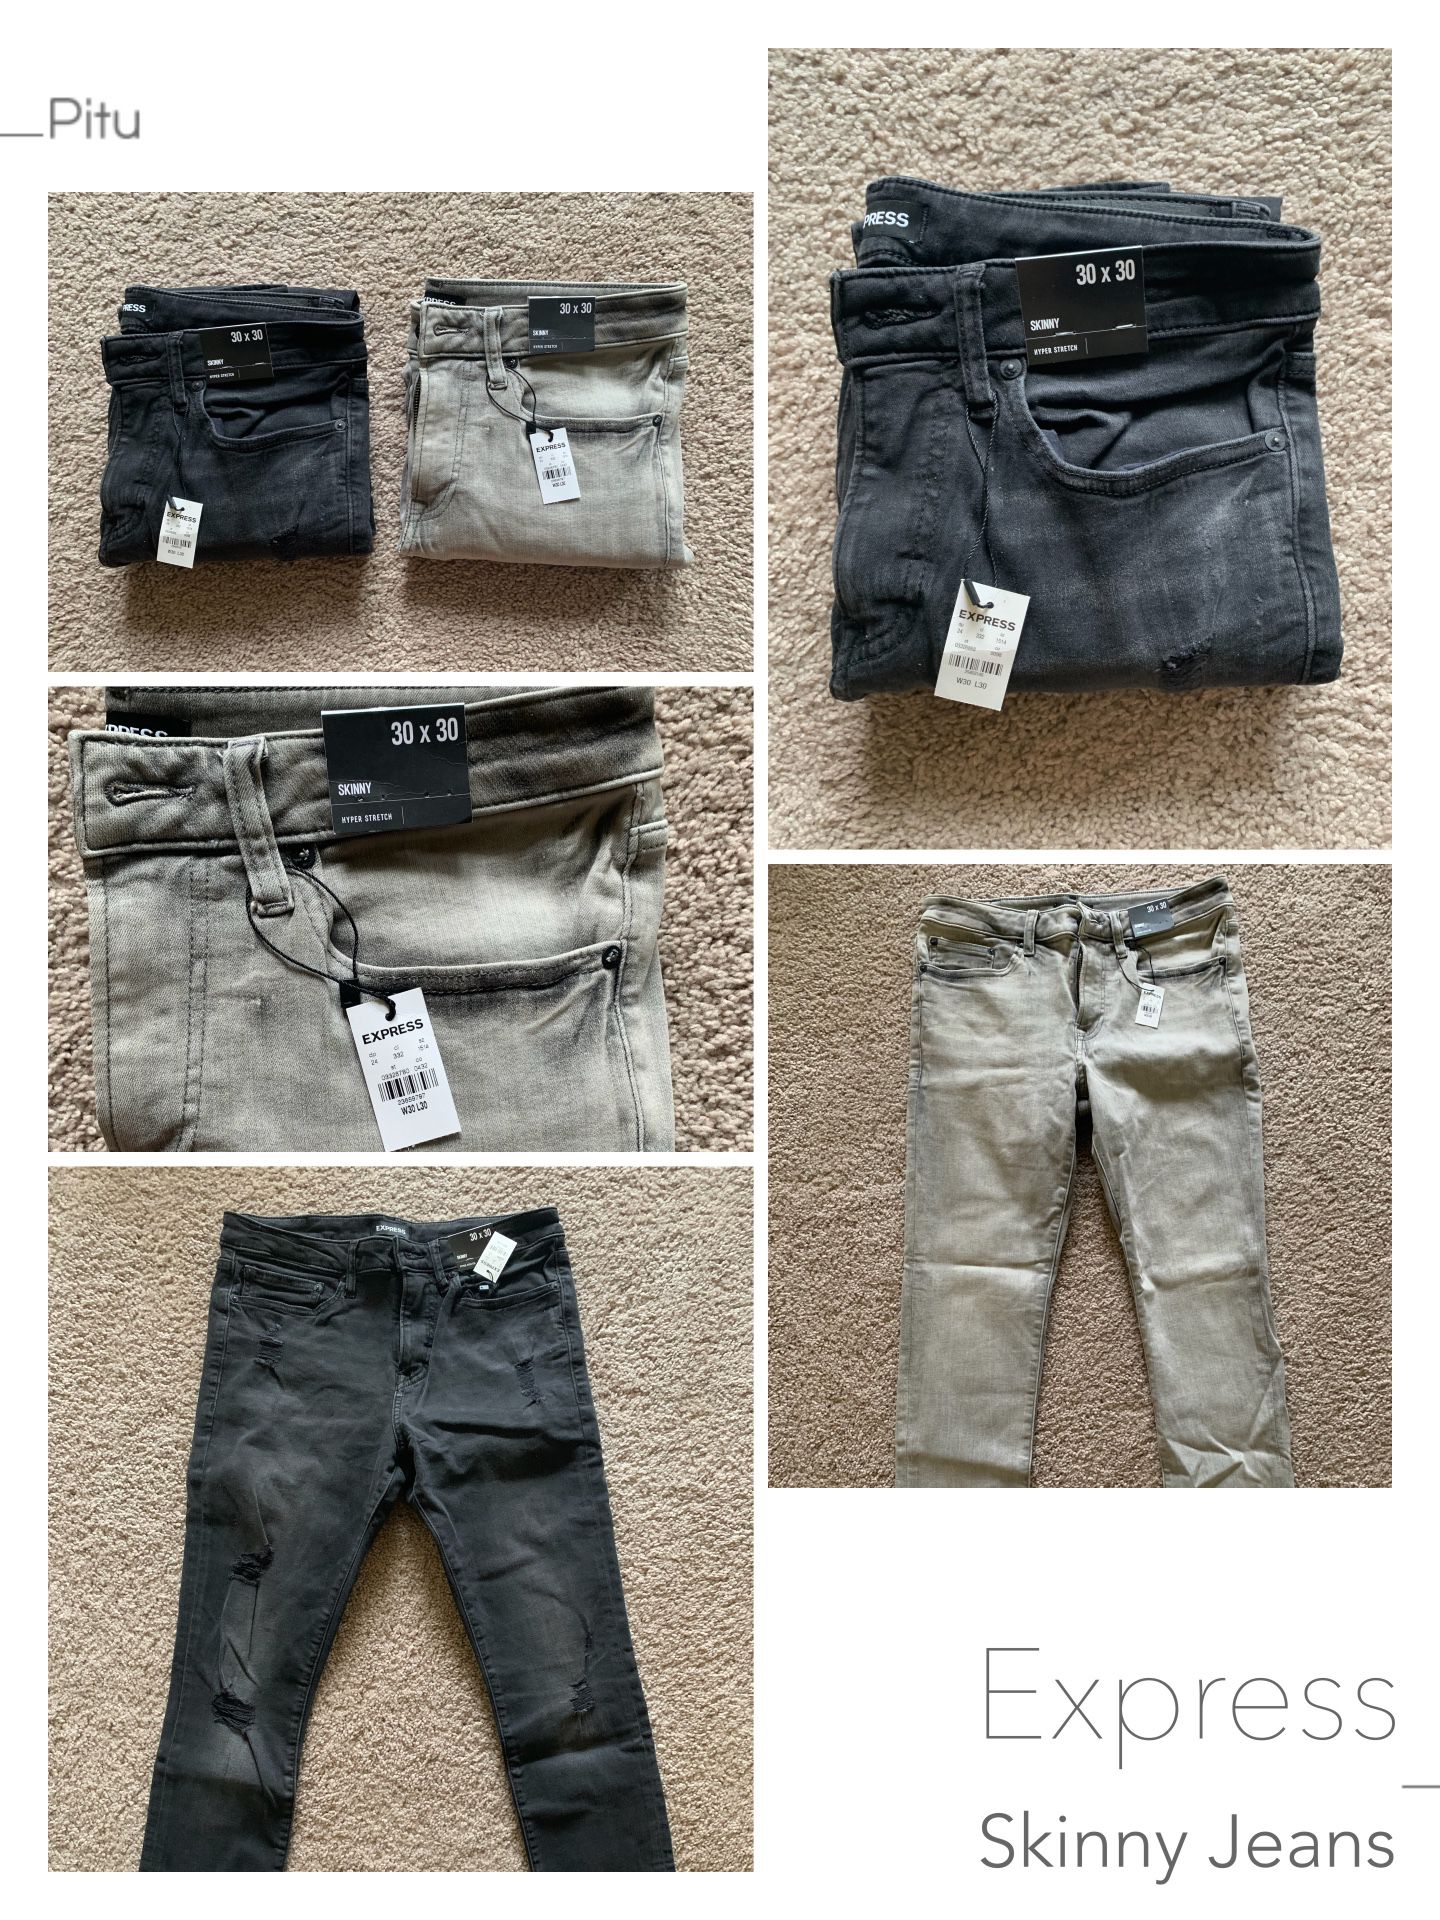 New Express Skinny Jeans Ripped 2X Pairs